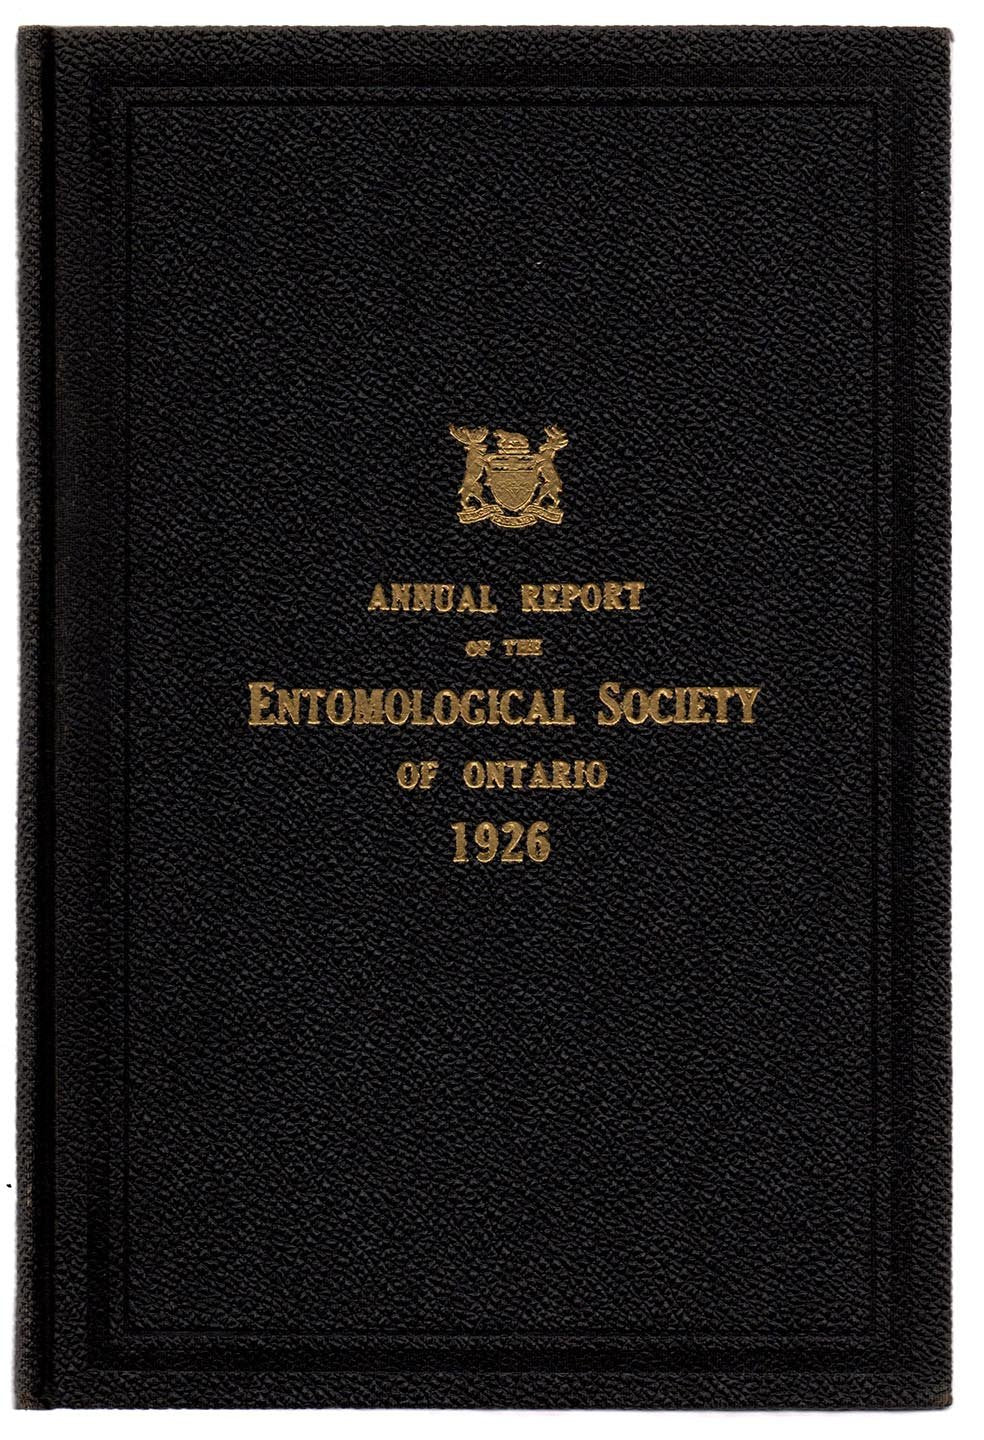 Fifty-seventh Annual Report of the Entomological Society of Ontario 1926